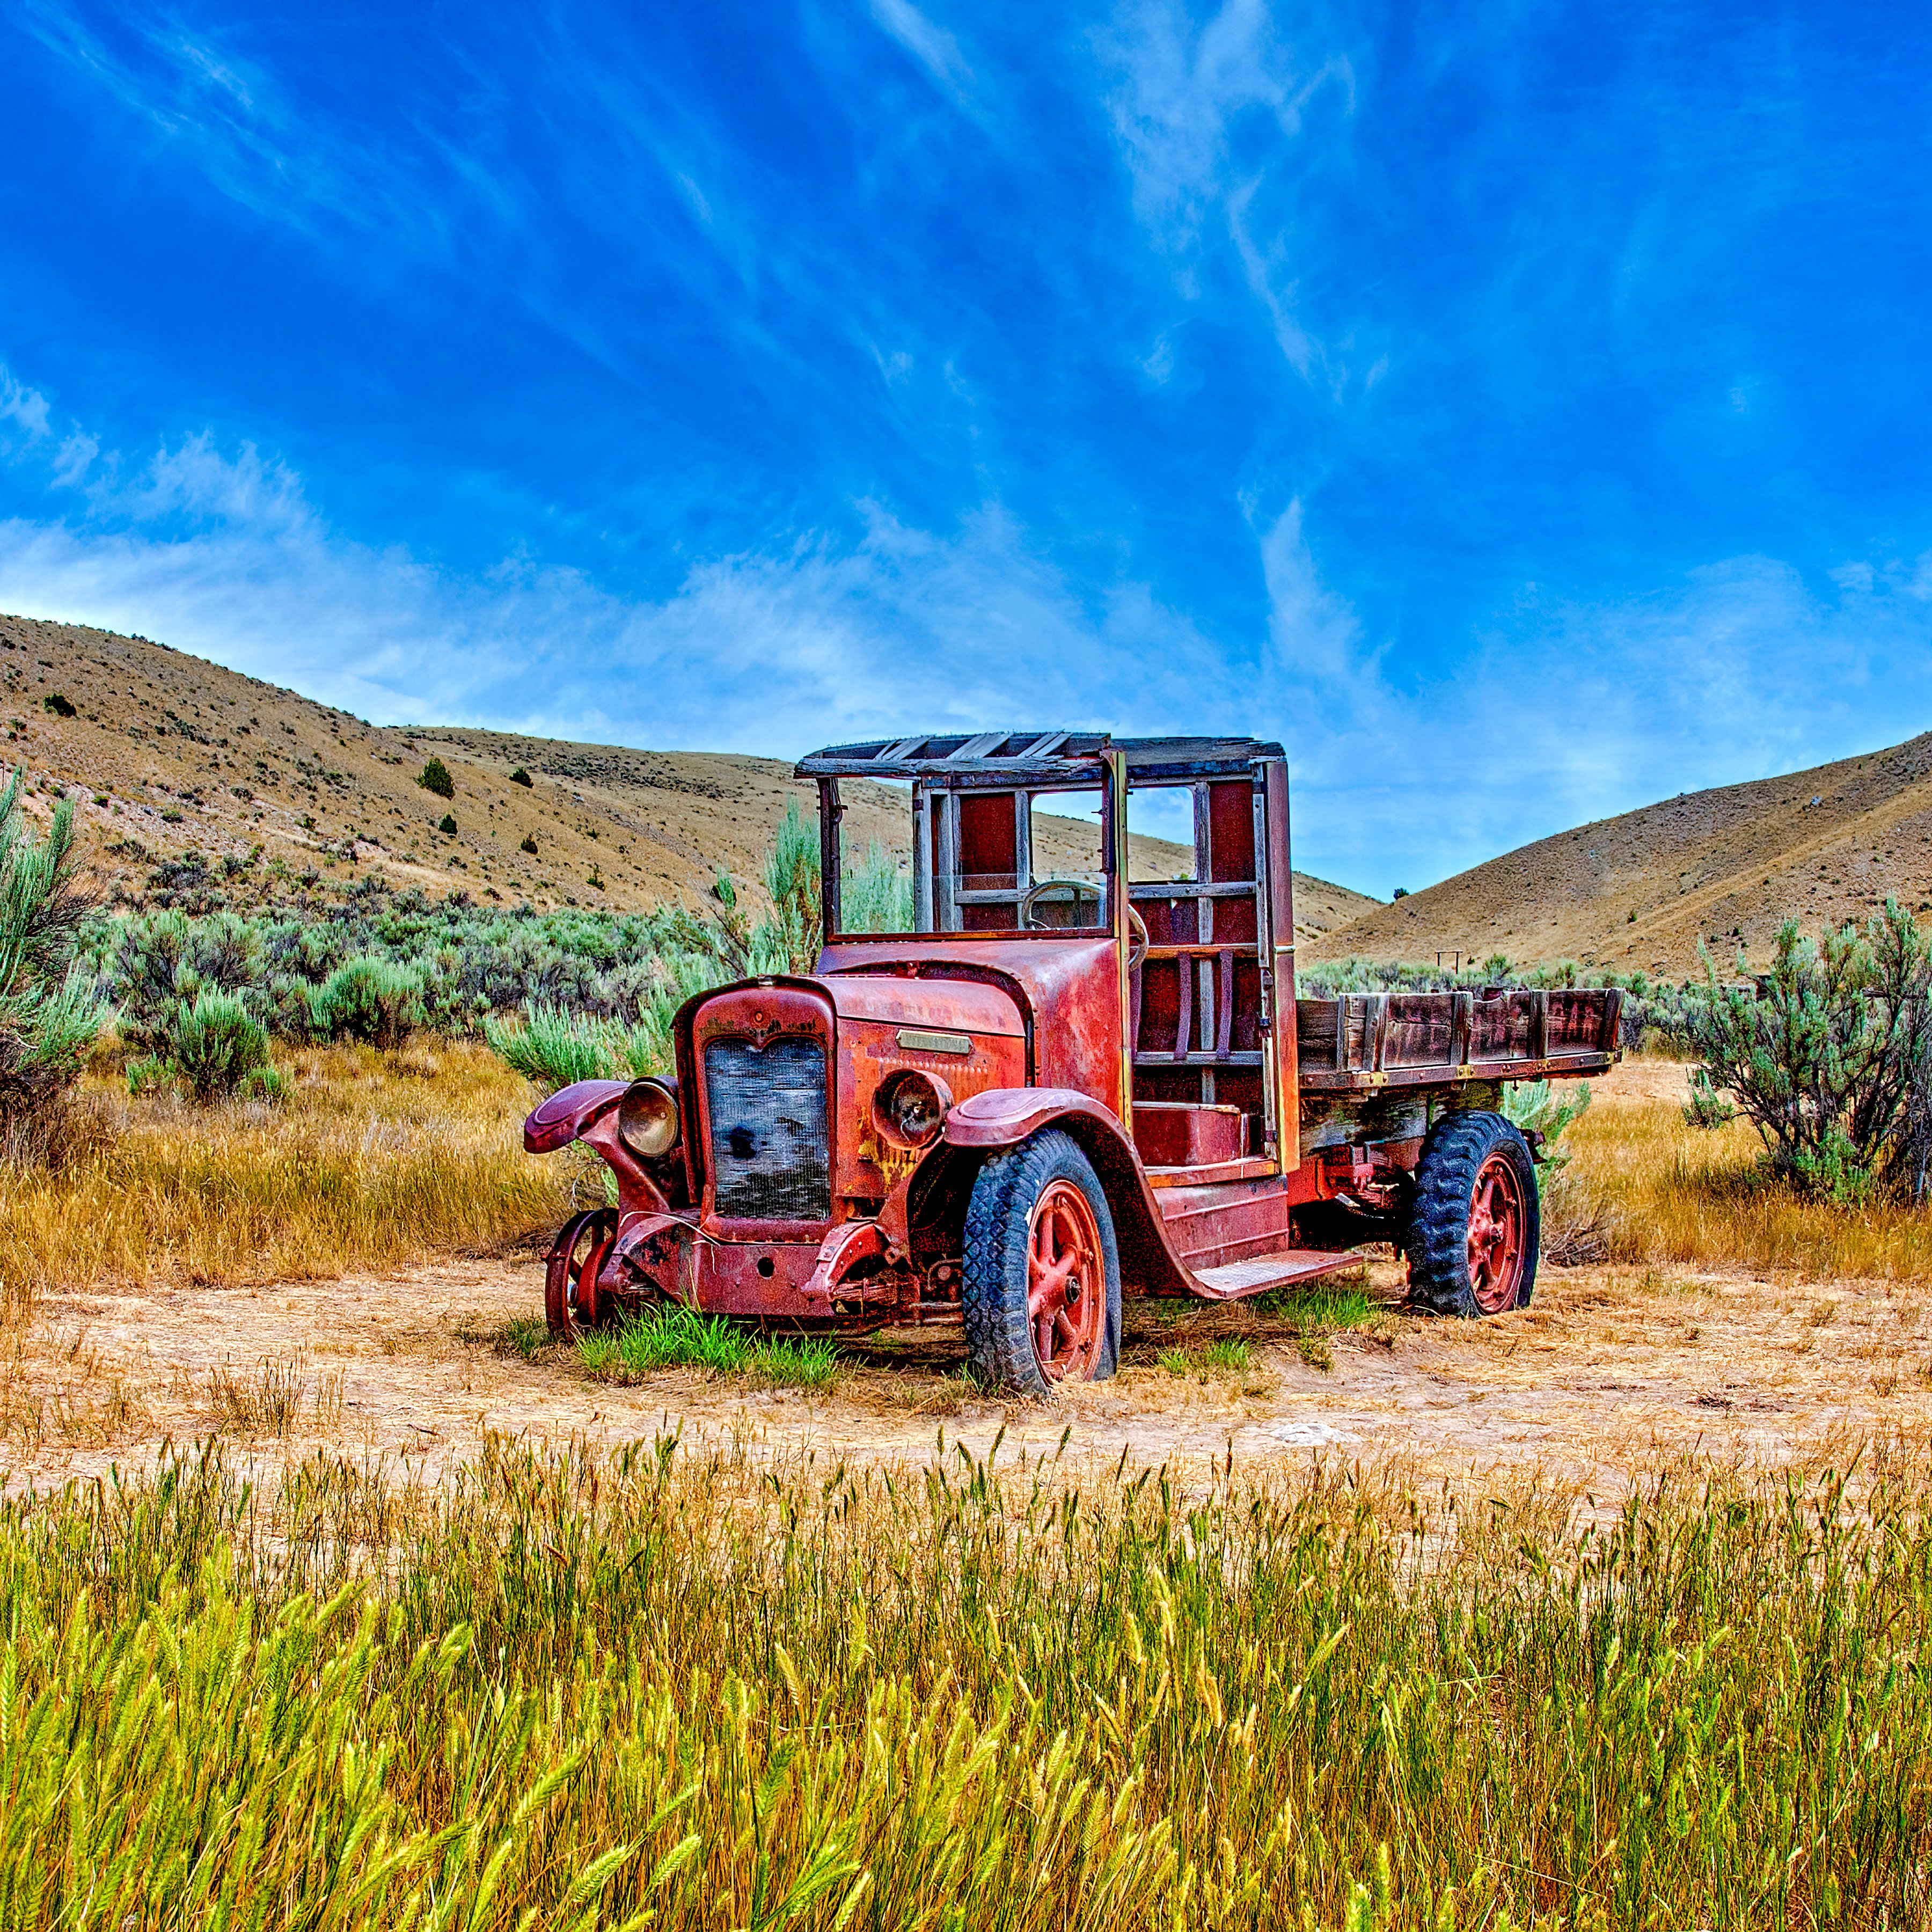 A GHOST TRUCK - It's really not a ghost truck, but it is in one of the best ghost towns... Bodie, California.